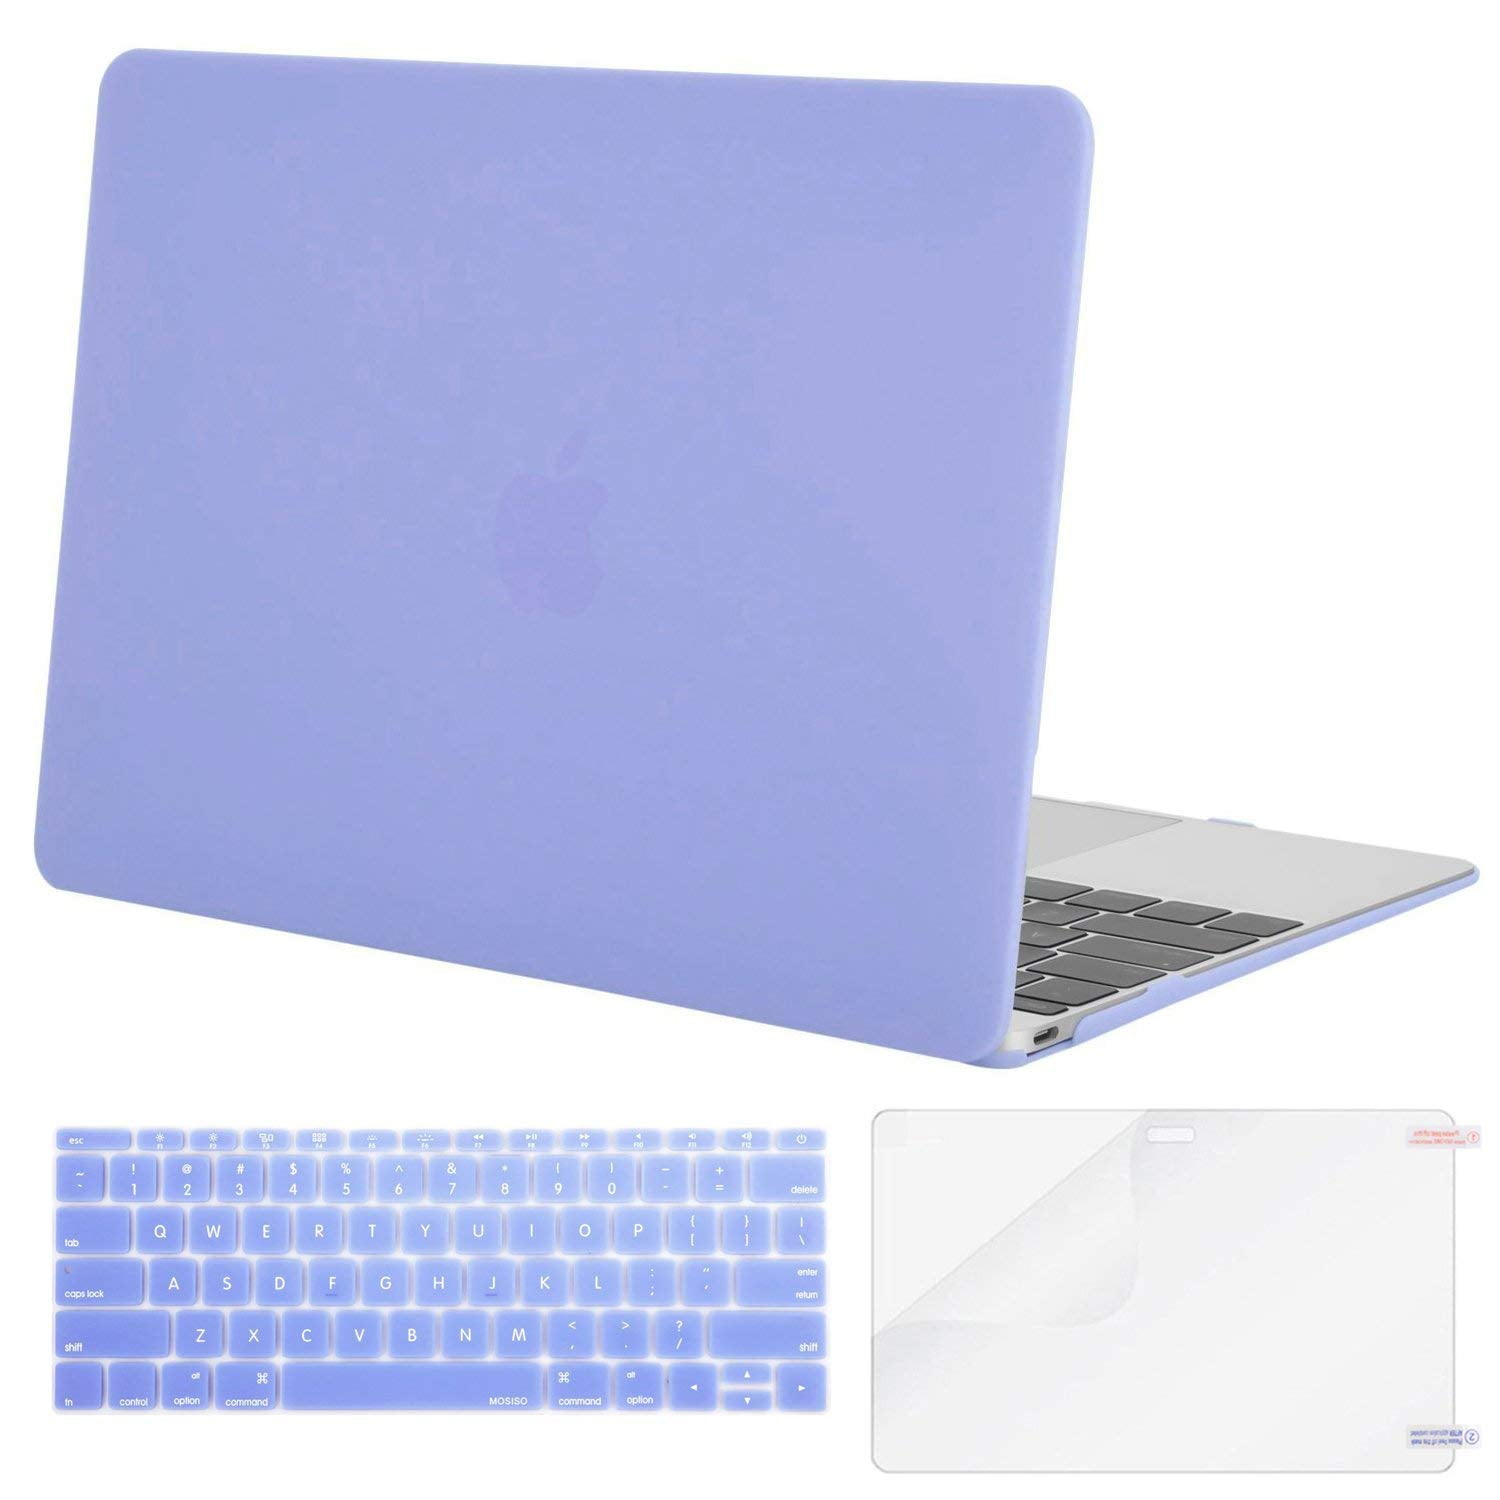 Newest Version 2017/2016/2015 MOSISO Plastic Hard Shell Case & Keyboard Cover & Screen Protector Compatible MacBook 12 Inch Retina Display A1534 Crystal Clear 